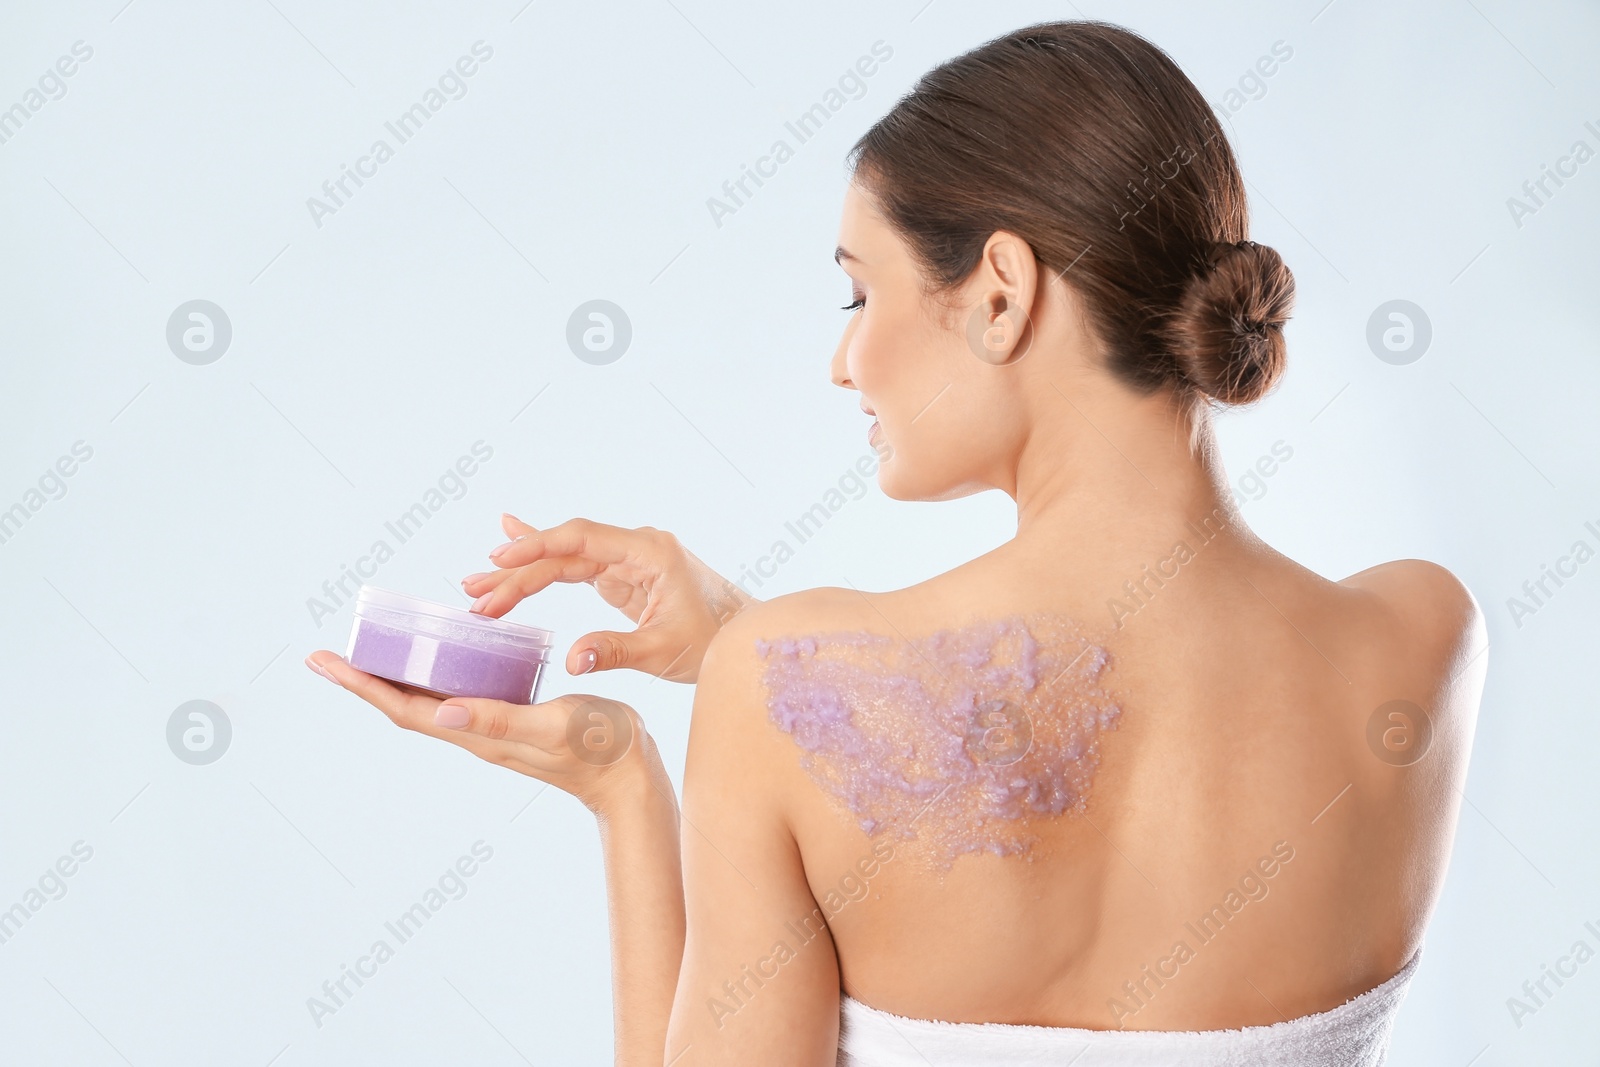 Photo of Young woman applying natural scrub on her body against light background